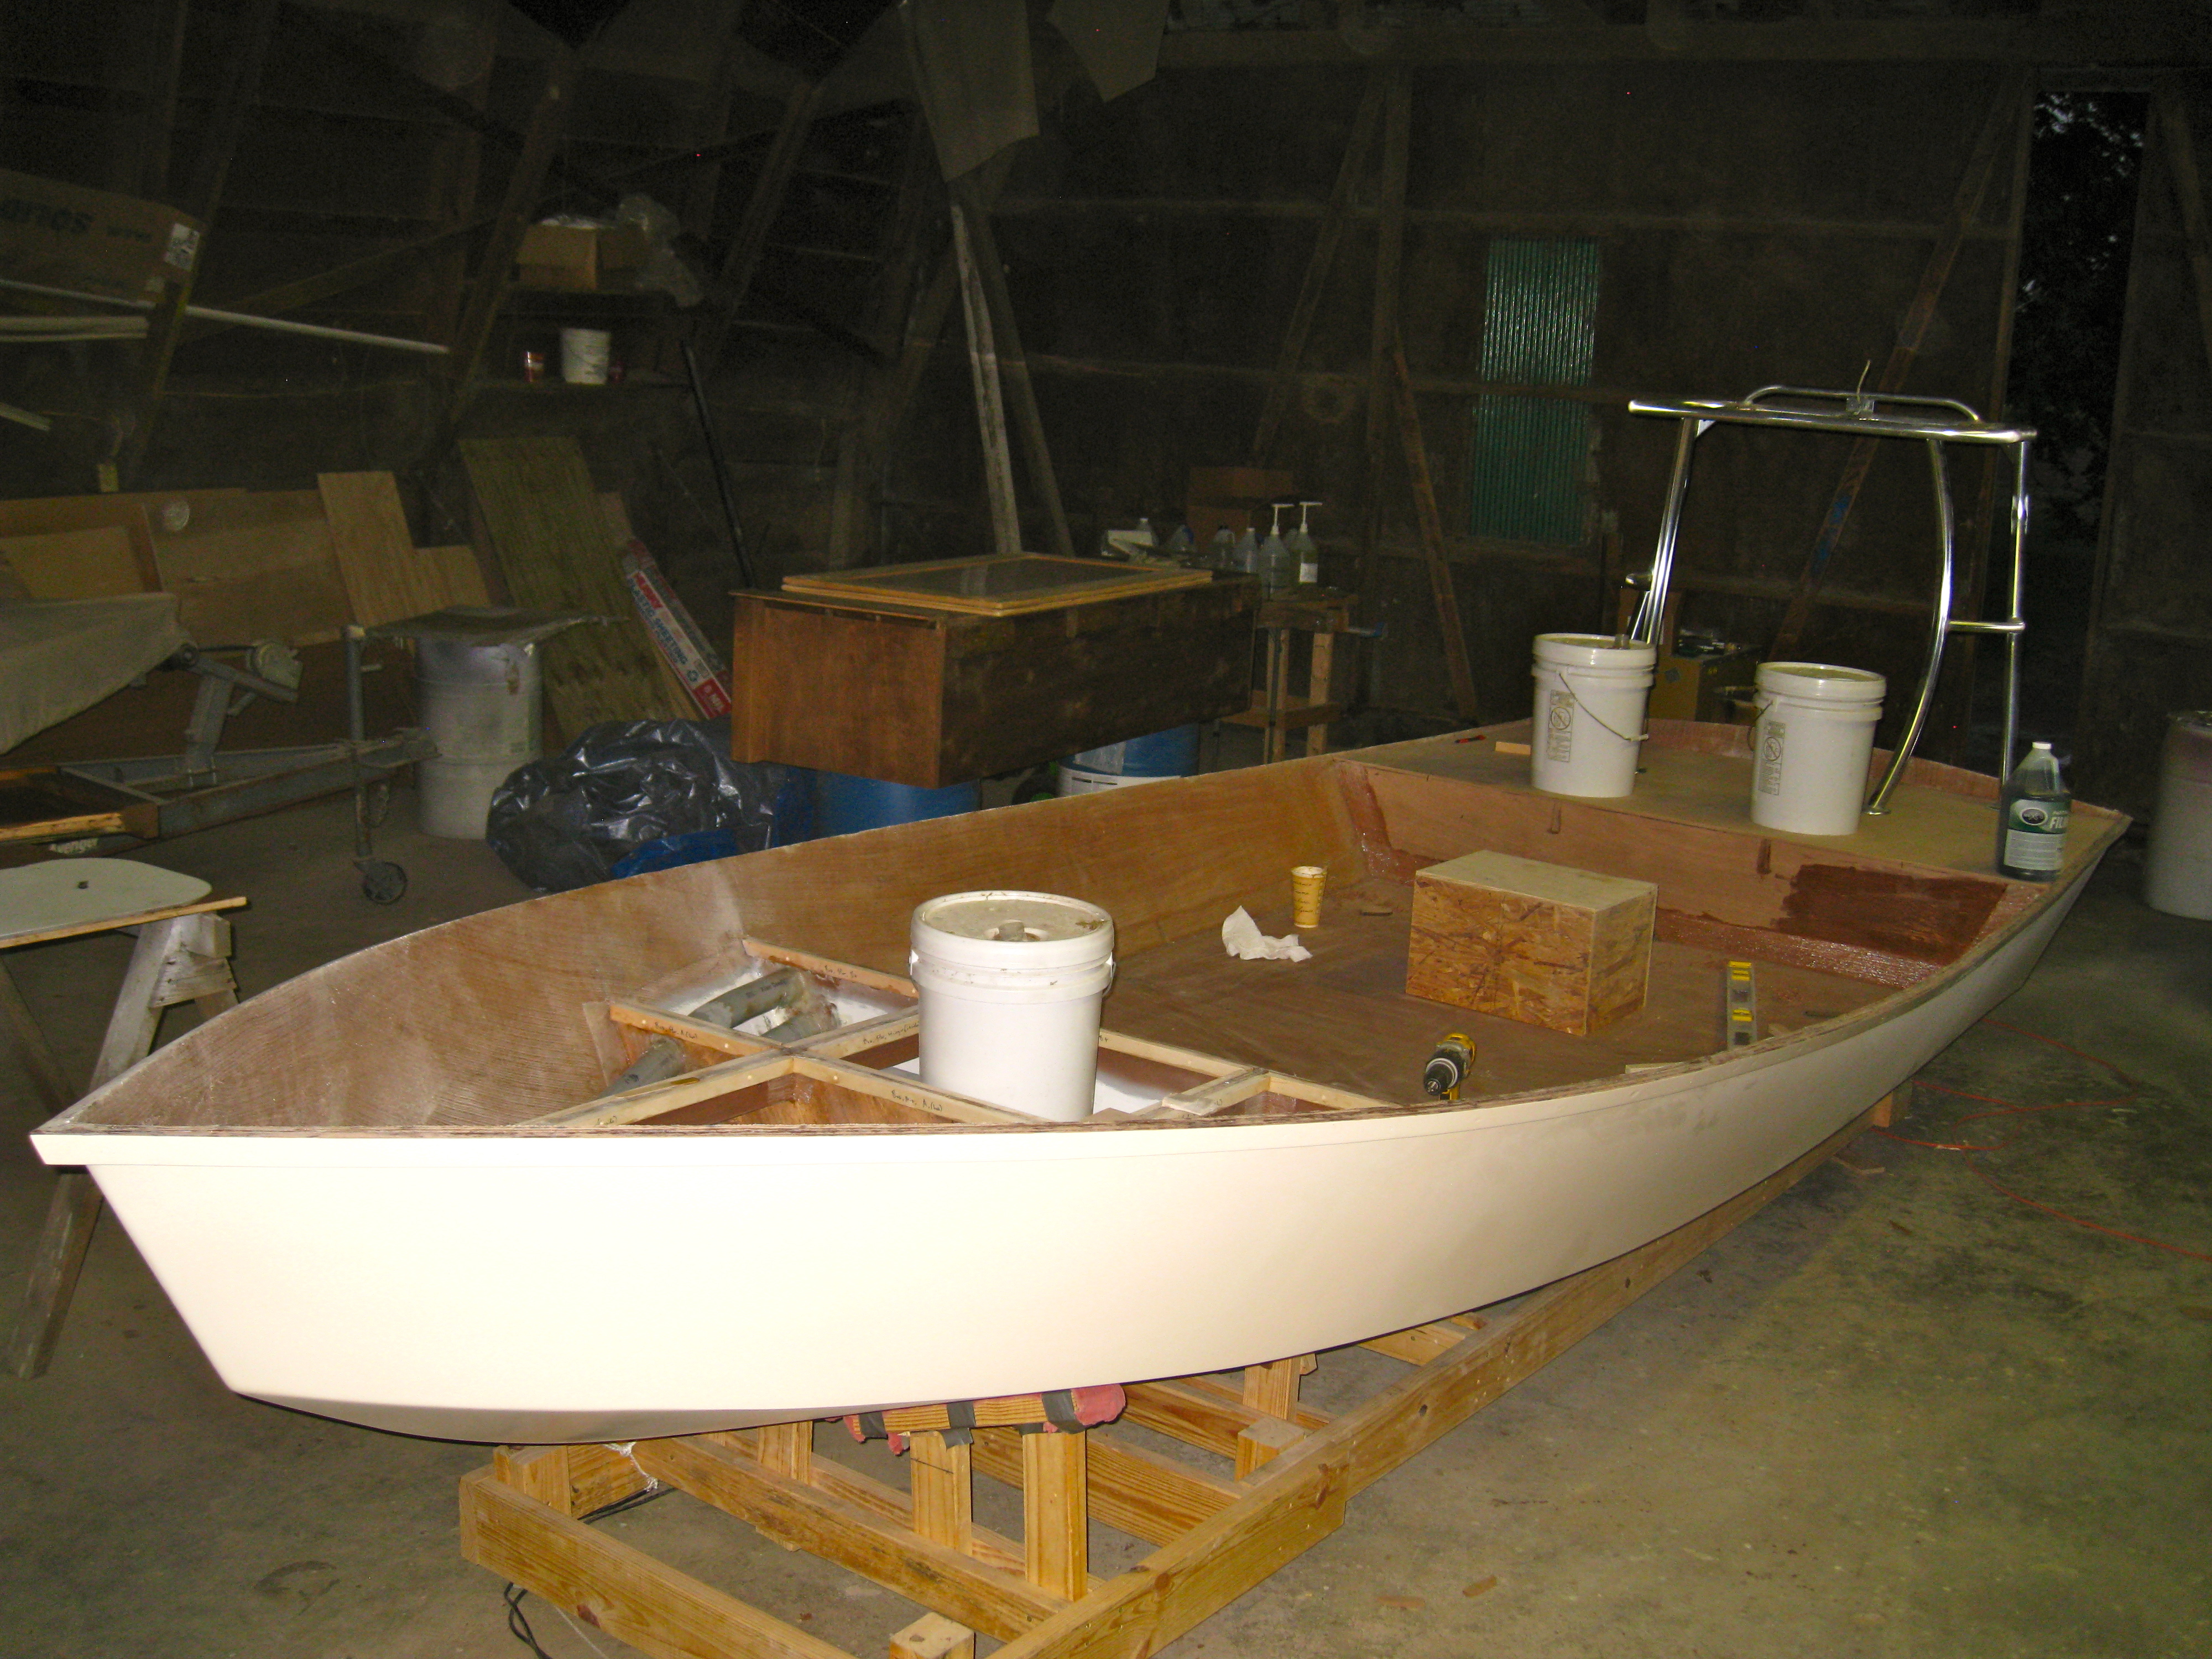 free plywood boat building plans wooden boat plans, boat